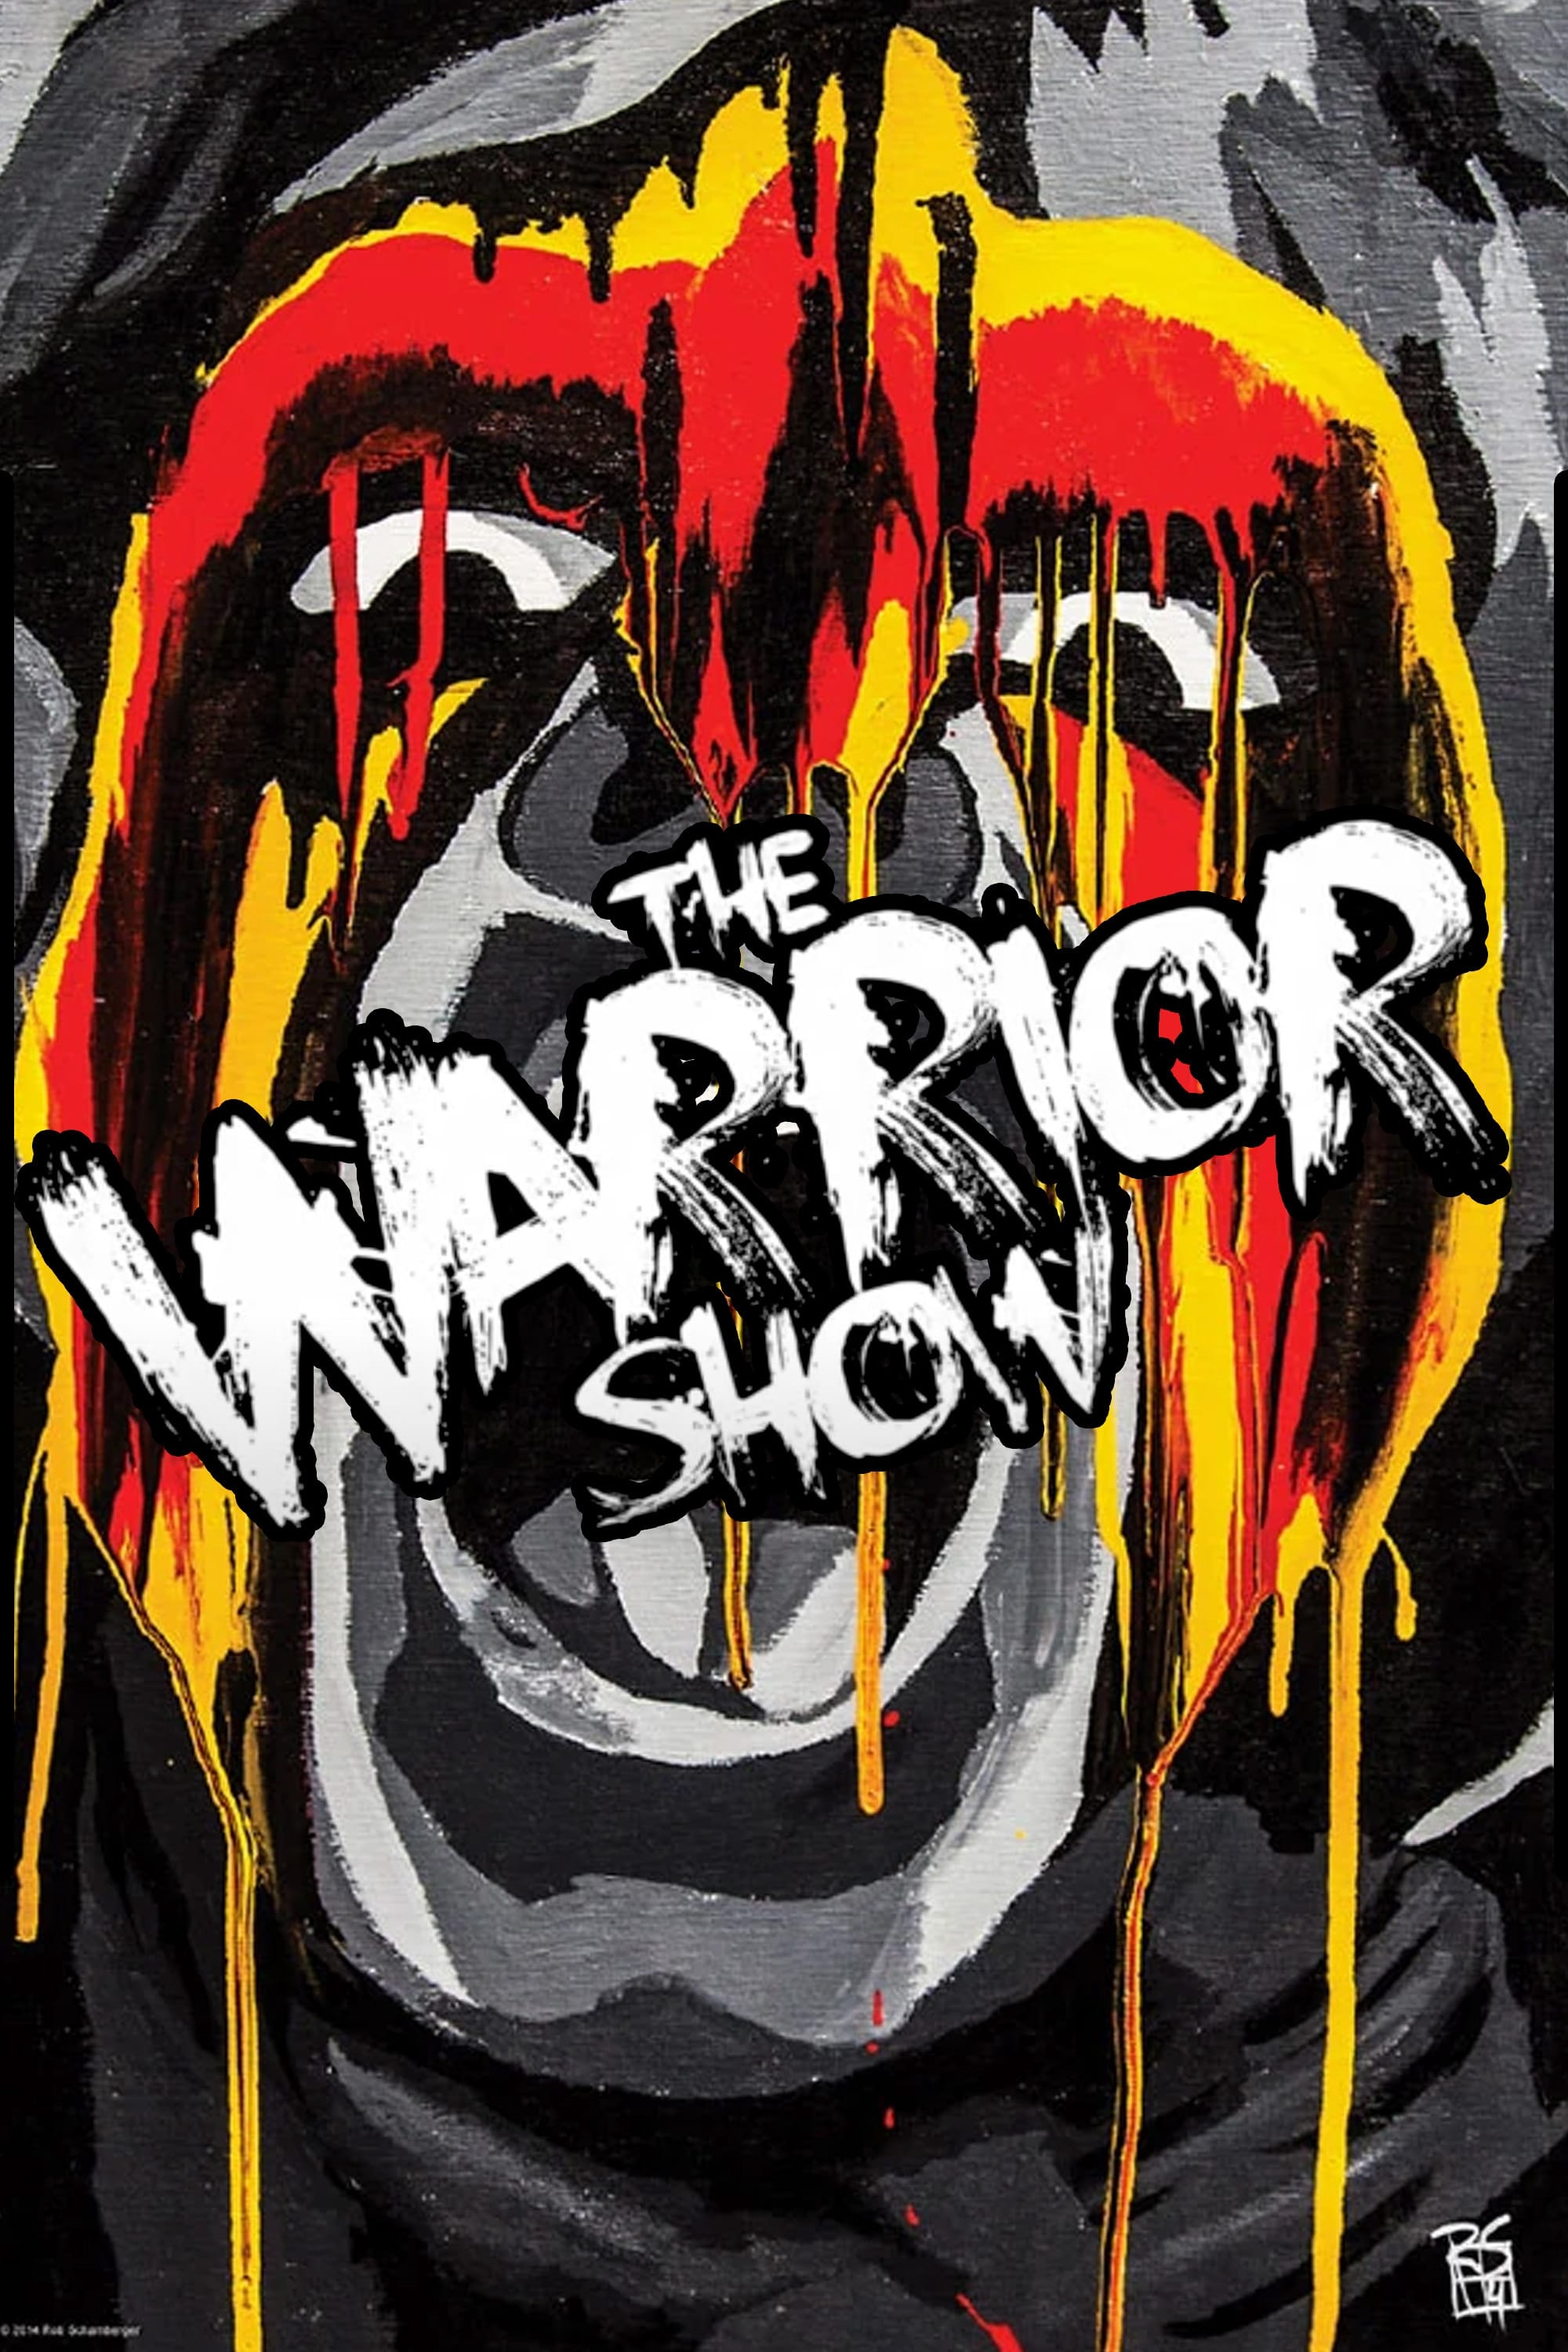 The Warrior Show